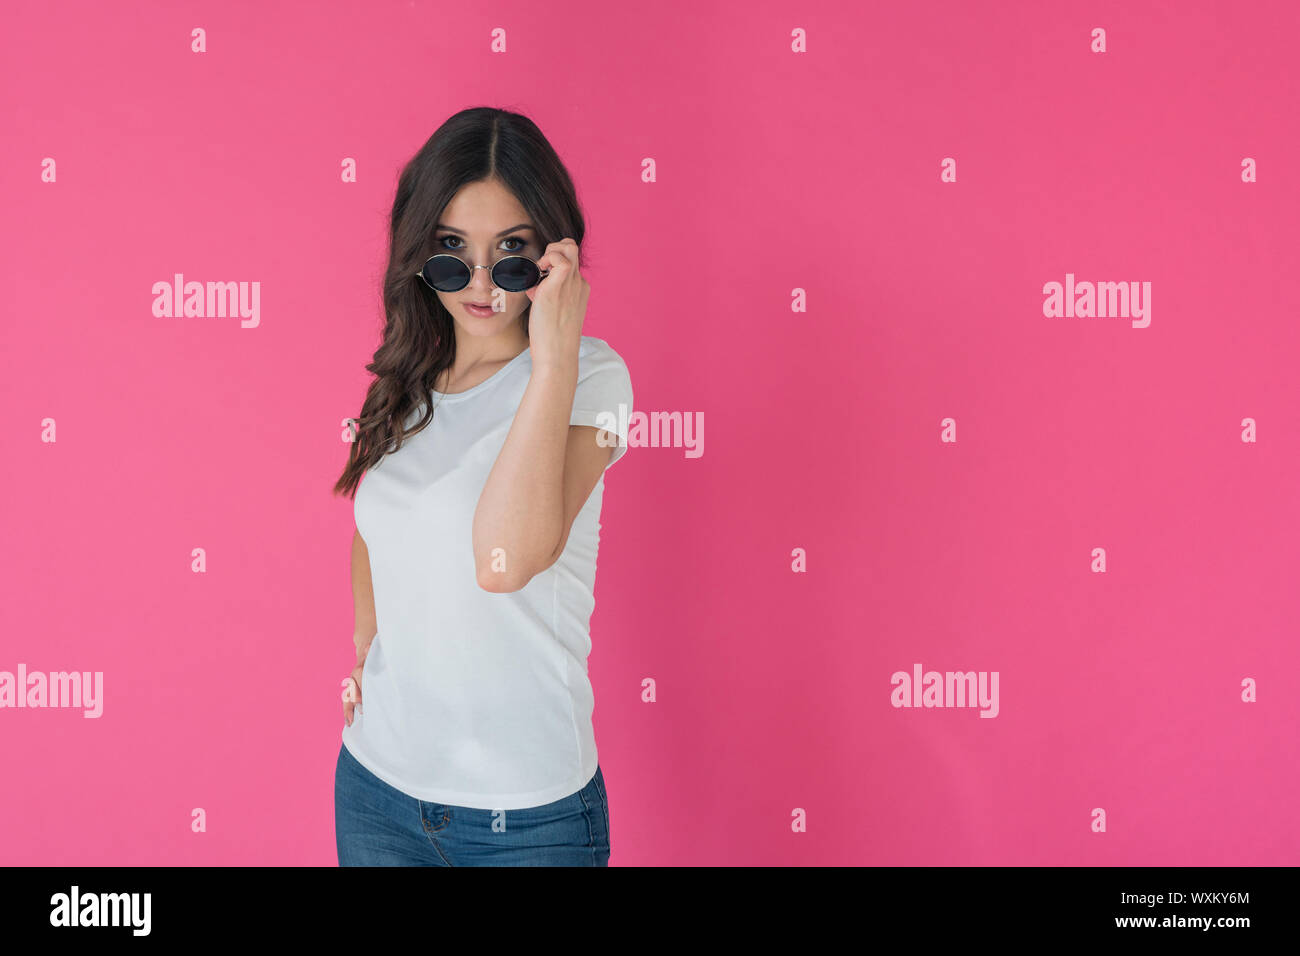 Portrait of a slender brunette in a white t-shirt on a pink background. Mock-up for t-shirt design Stock Photo